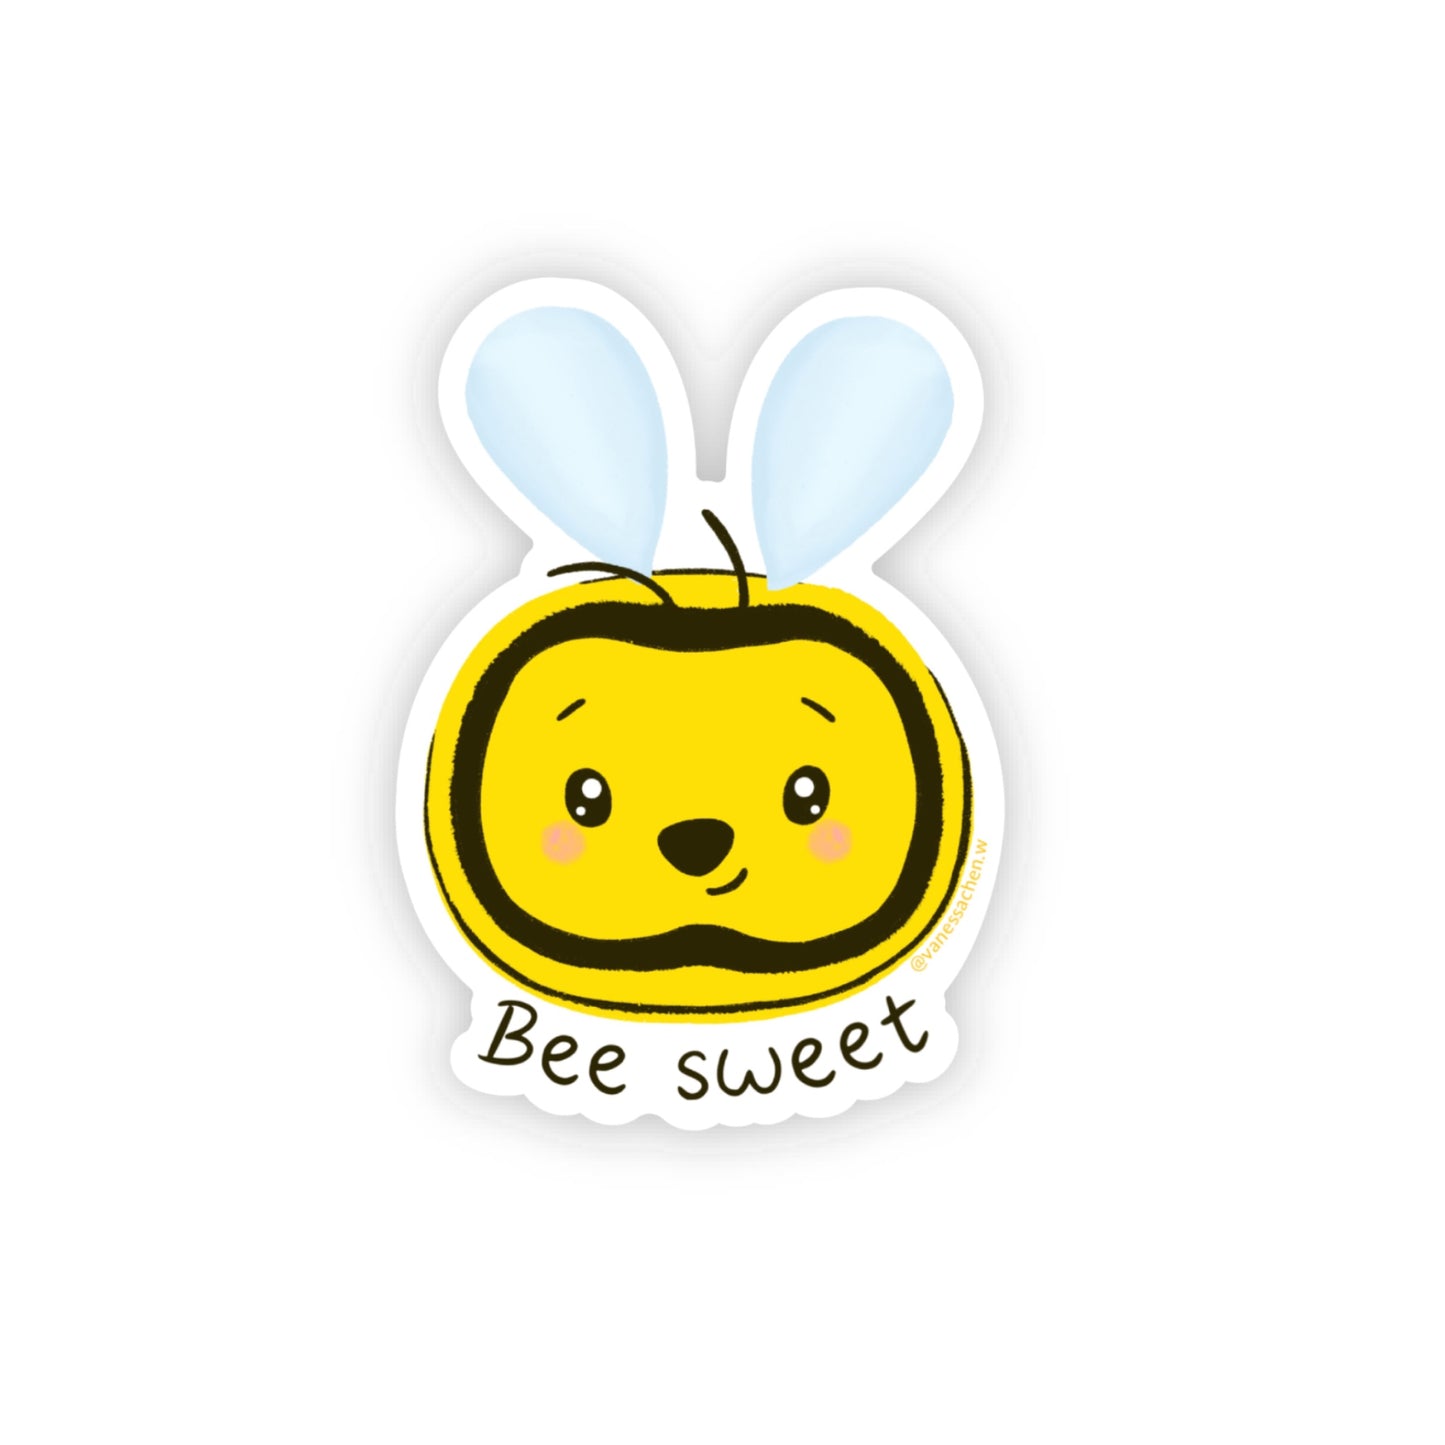 Let Fuzzy the Bee remind you and your loved ones that we all need a little sweetness in our lives. This vinyl sticker is perfect for your phone, laptop, water bottle or on almost any surface.